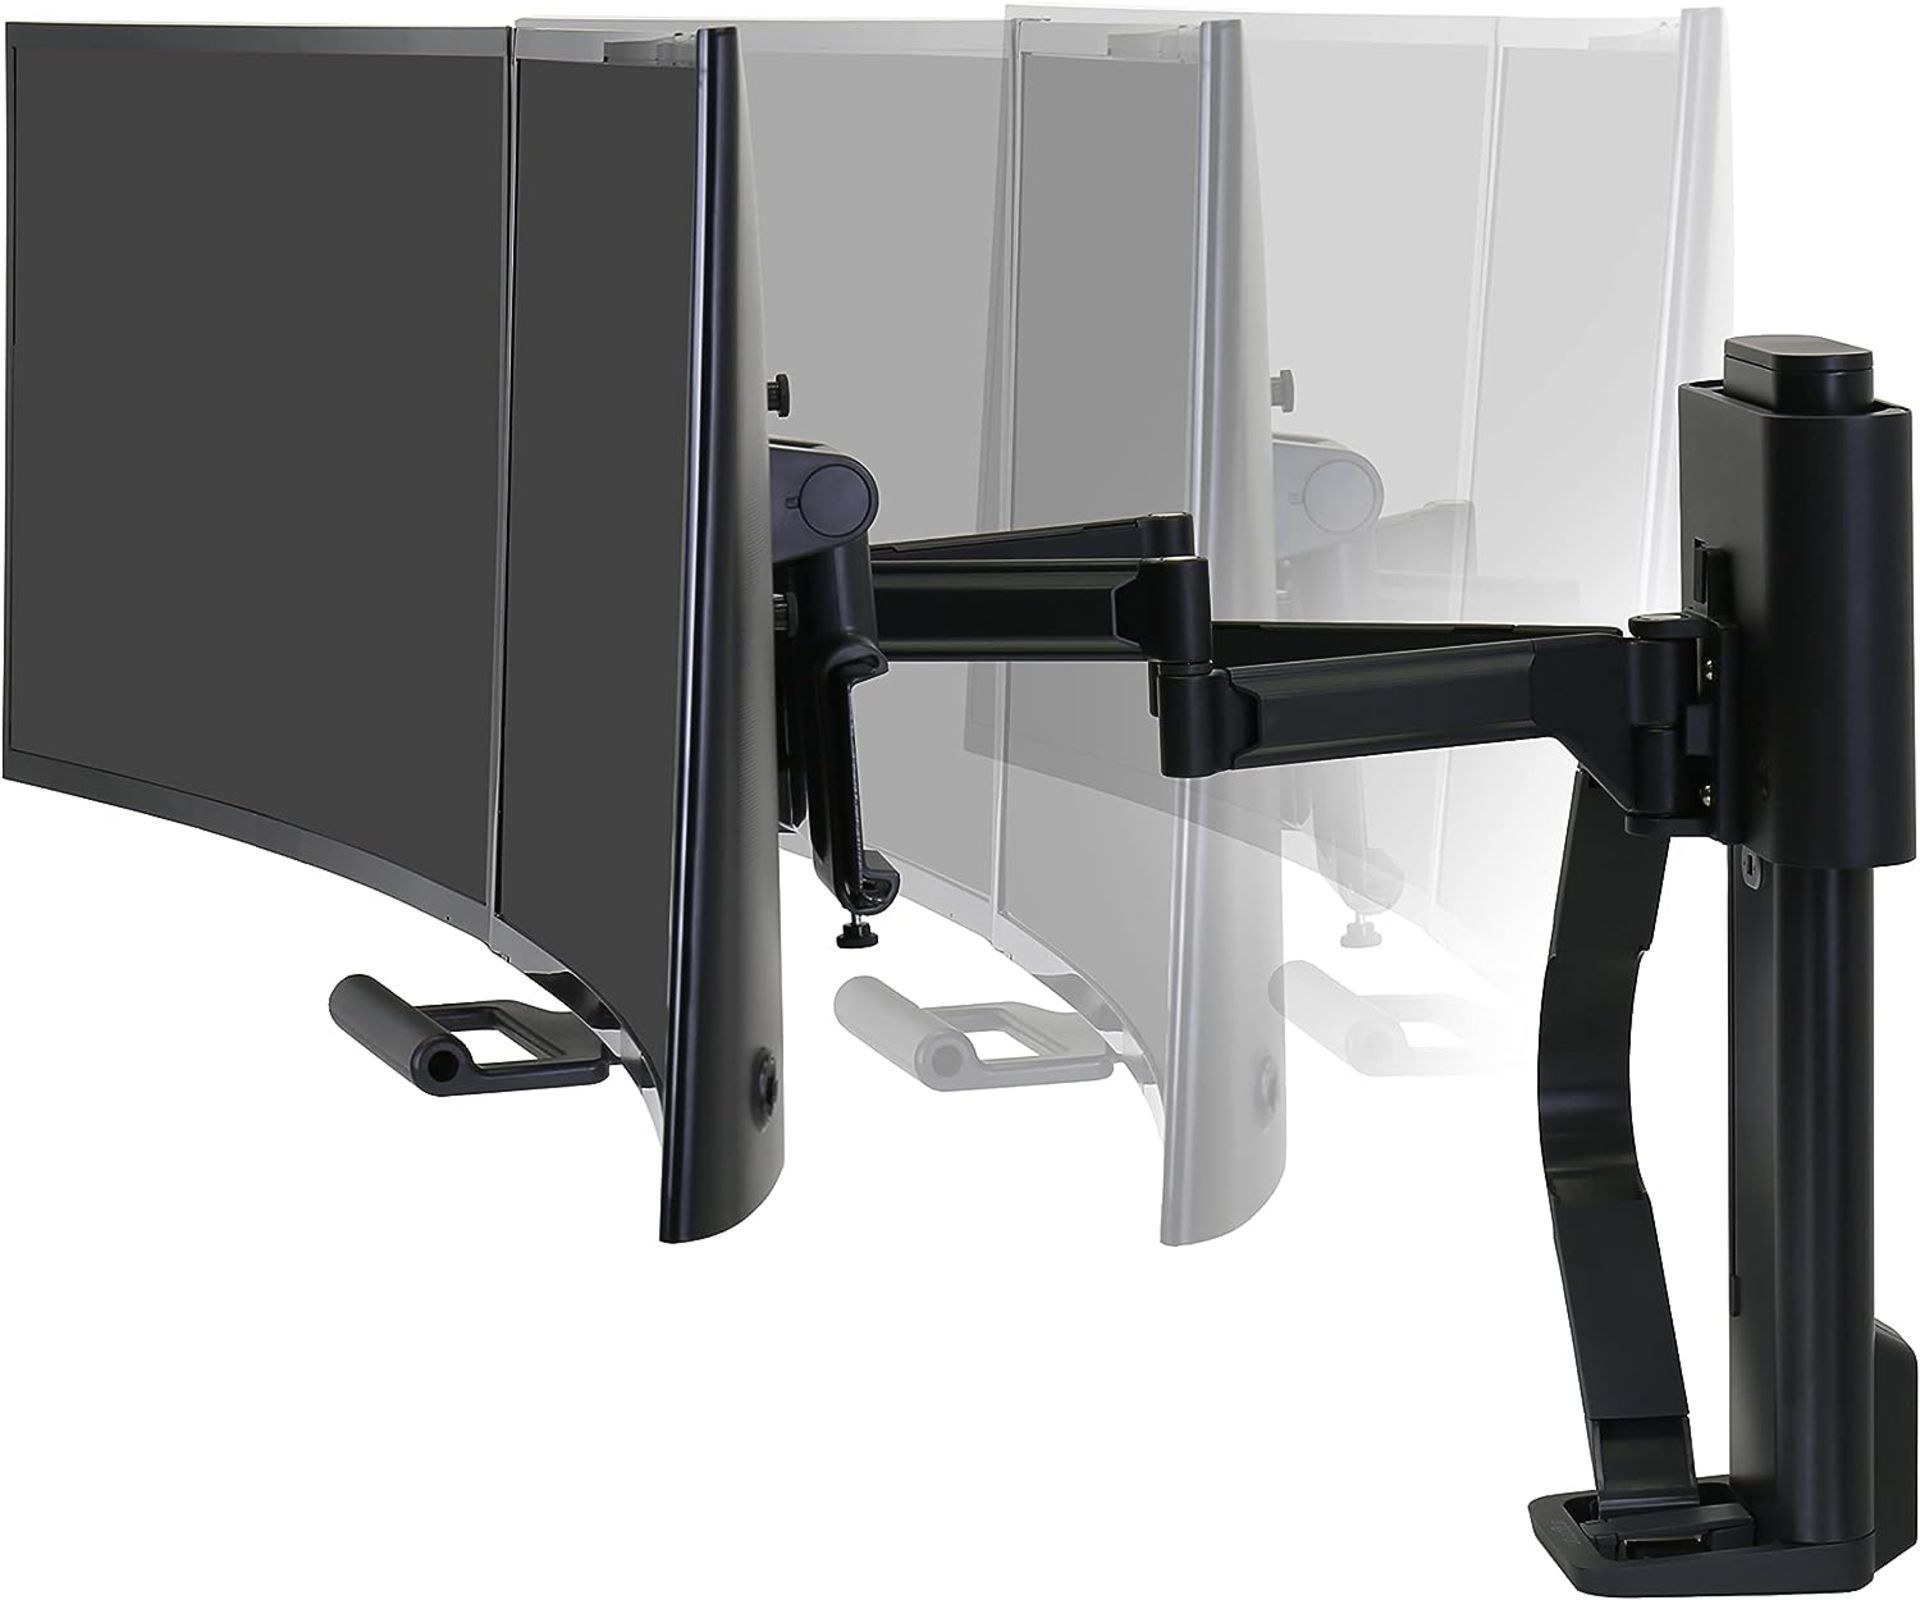 NEW & BOXED ERGOTRON Trace Dual Monitor Arm, VESA Desk Mount. RRP £417. (PCK5). for 2 Monitors Up to - Image 2 of 8